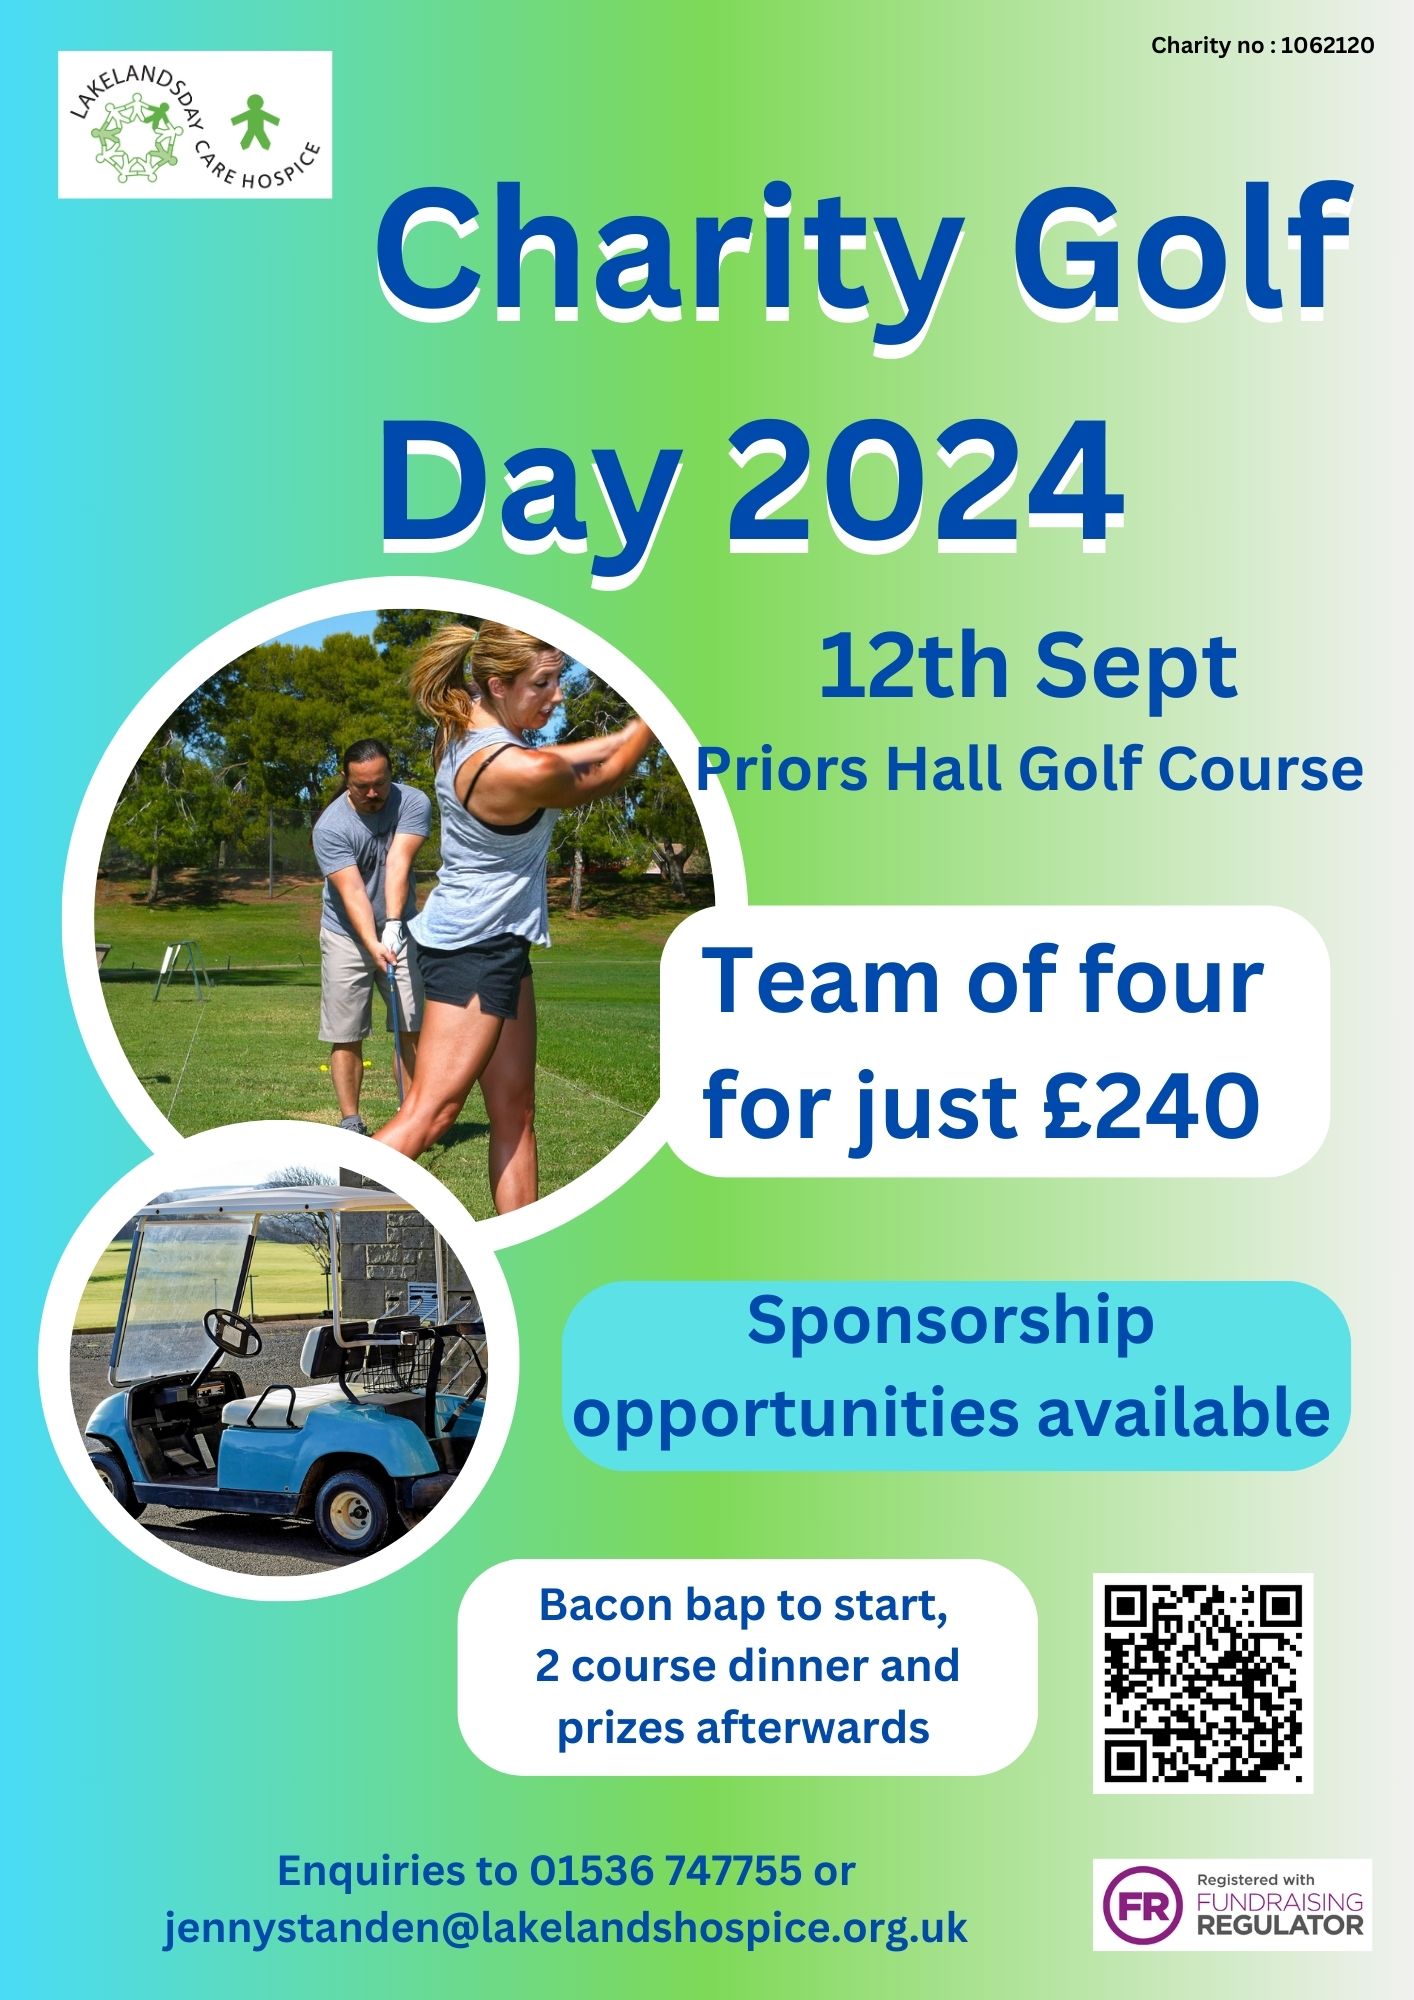 Lakelands Hospice Golf Day 2024 | Northamptonshire Chamber of Commerce